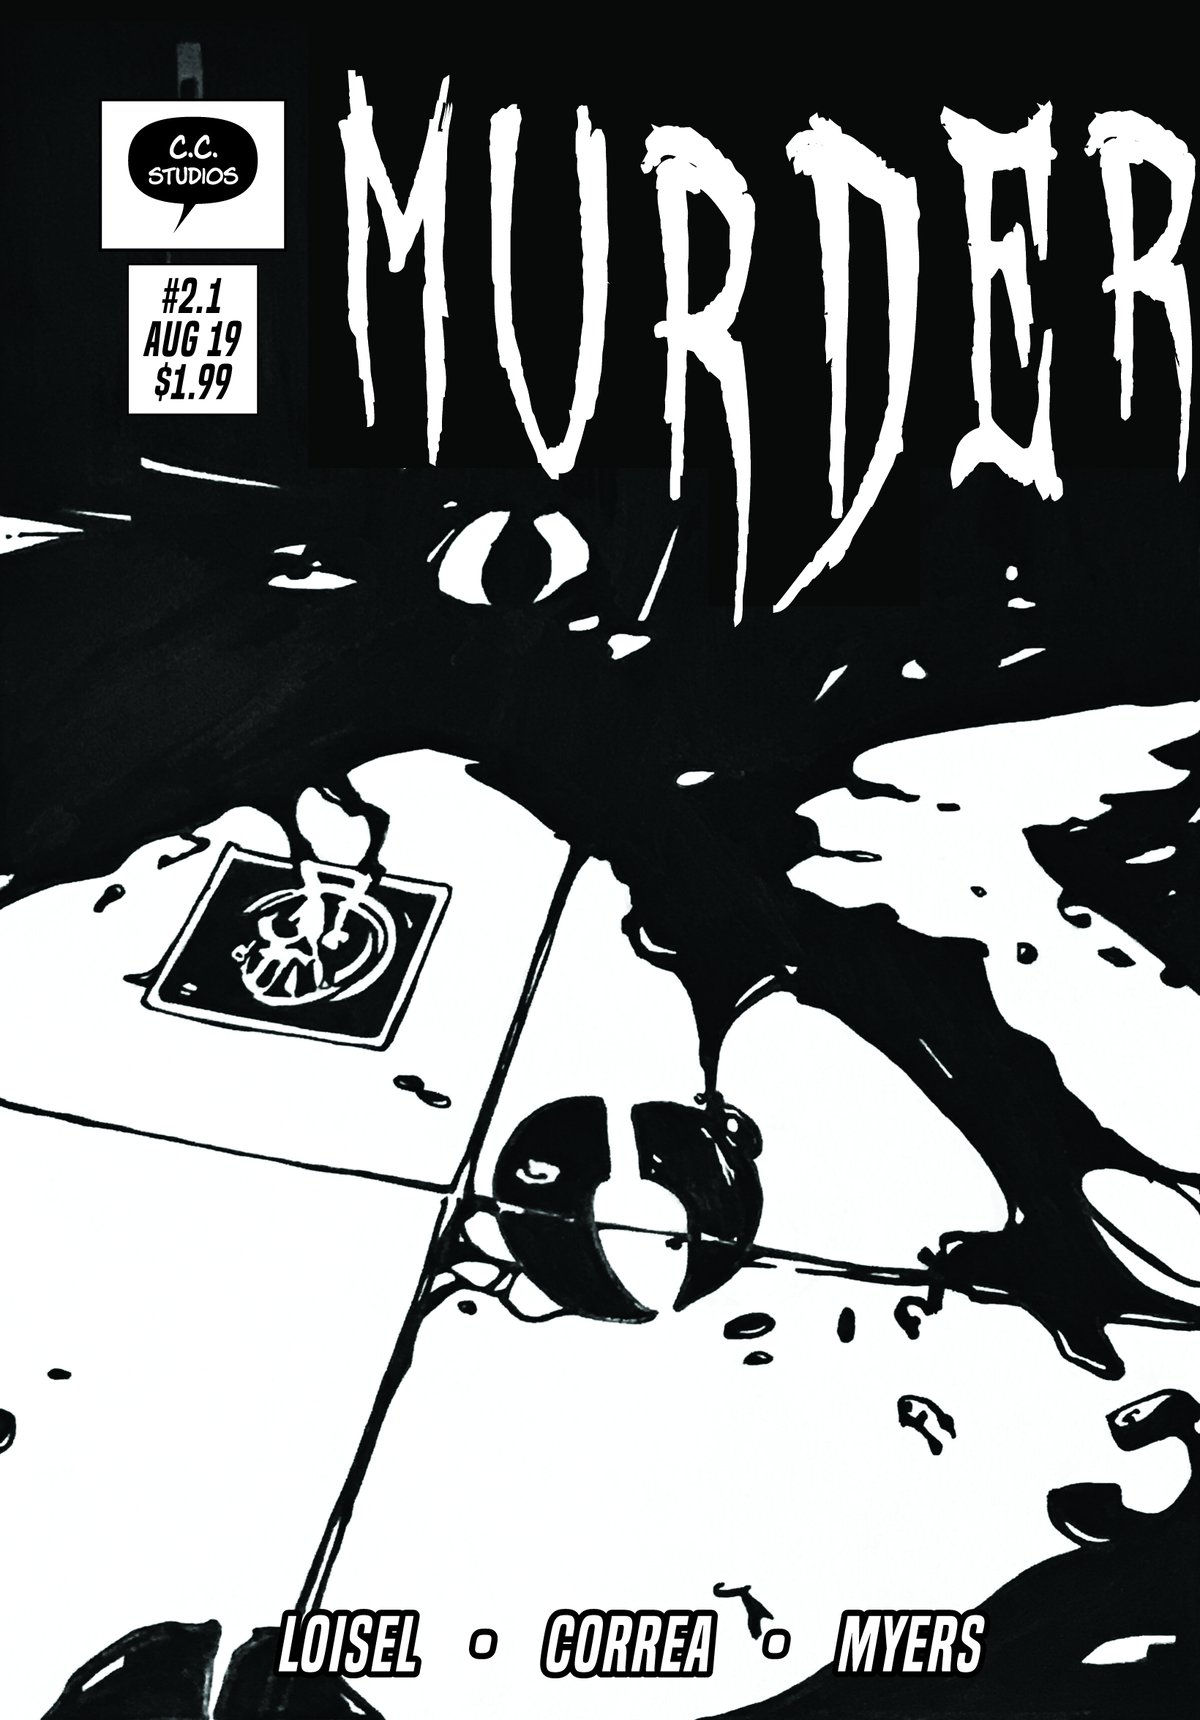 Image of Murder issue 2.1